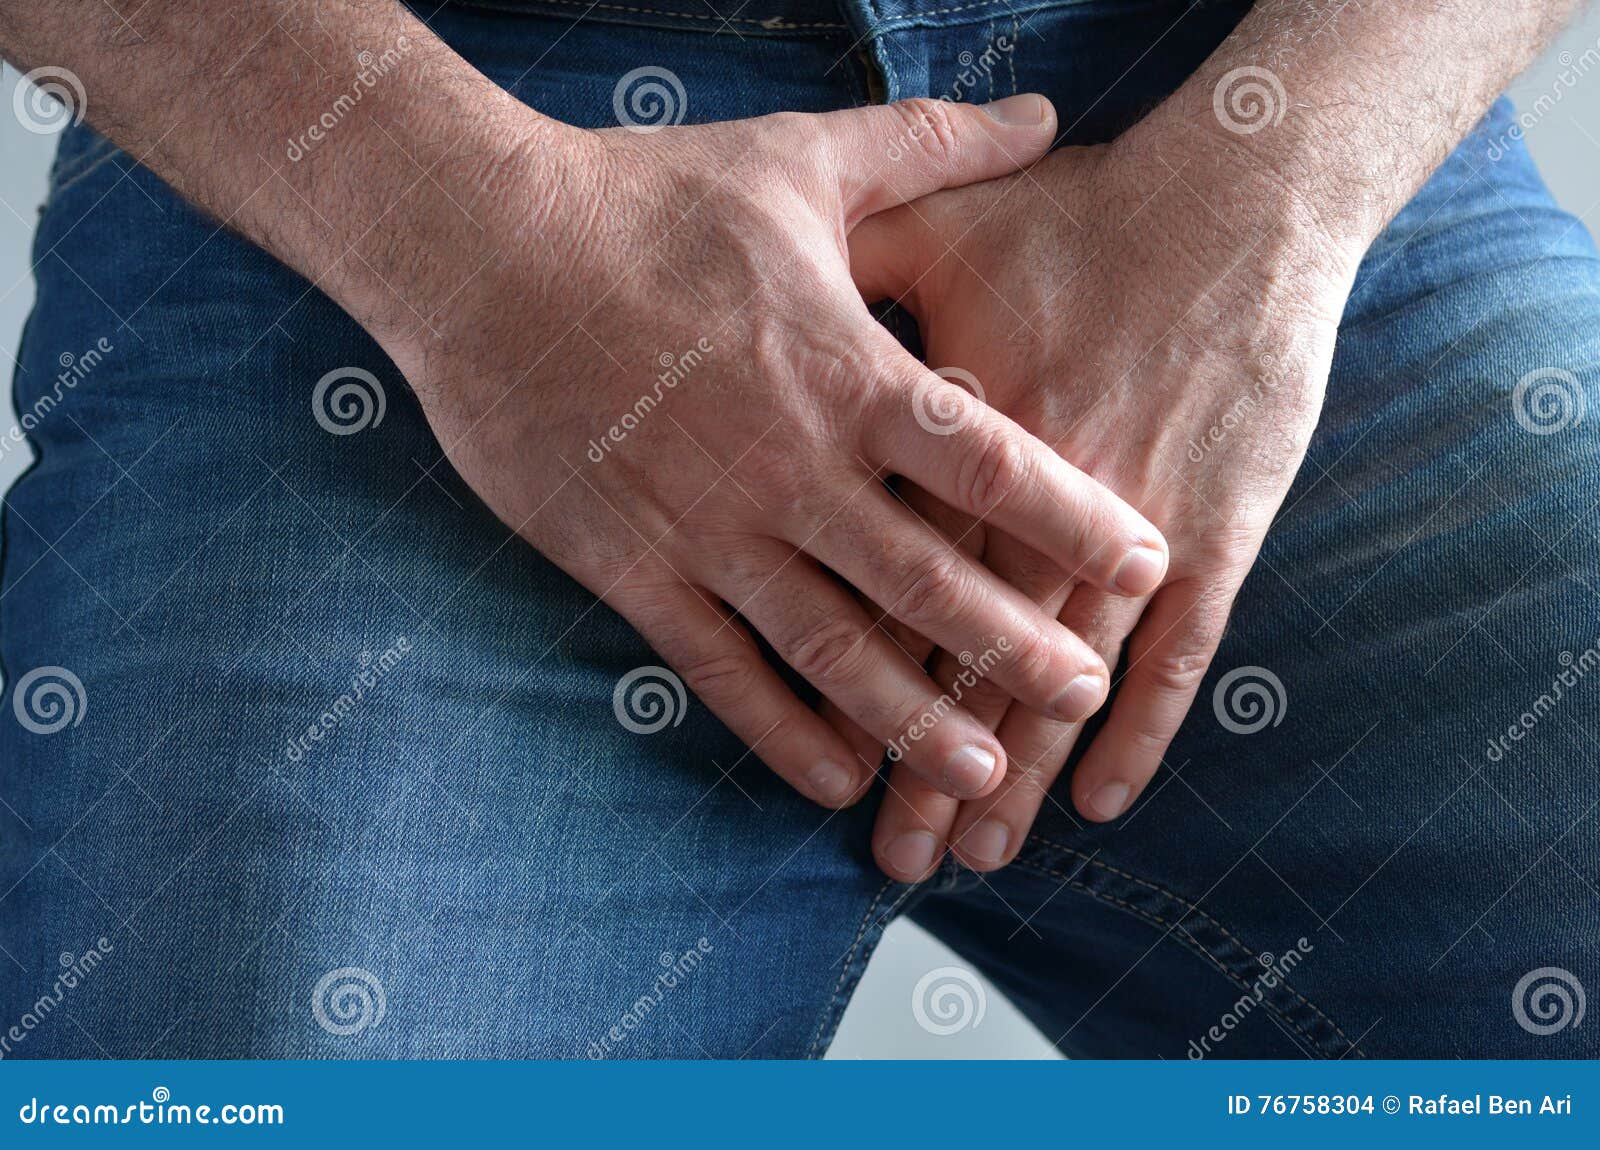 man hands covering his painful crotch